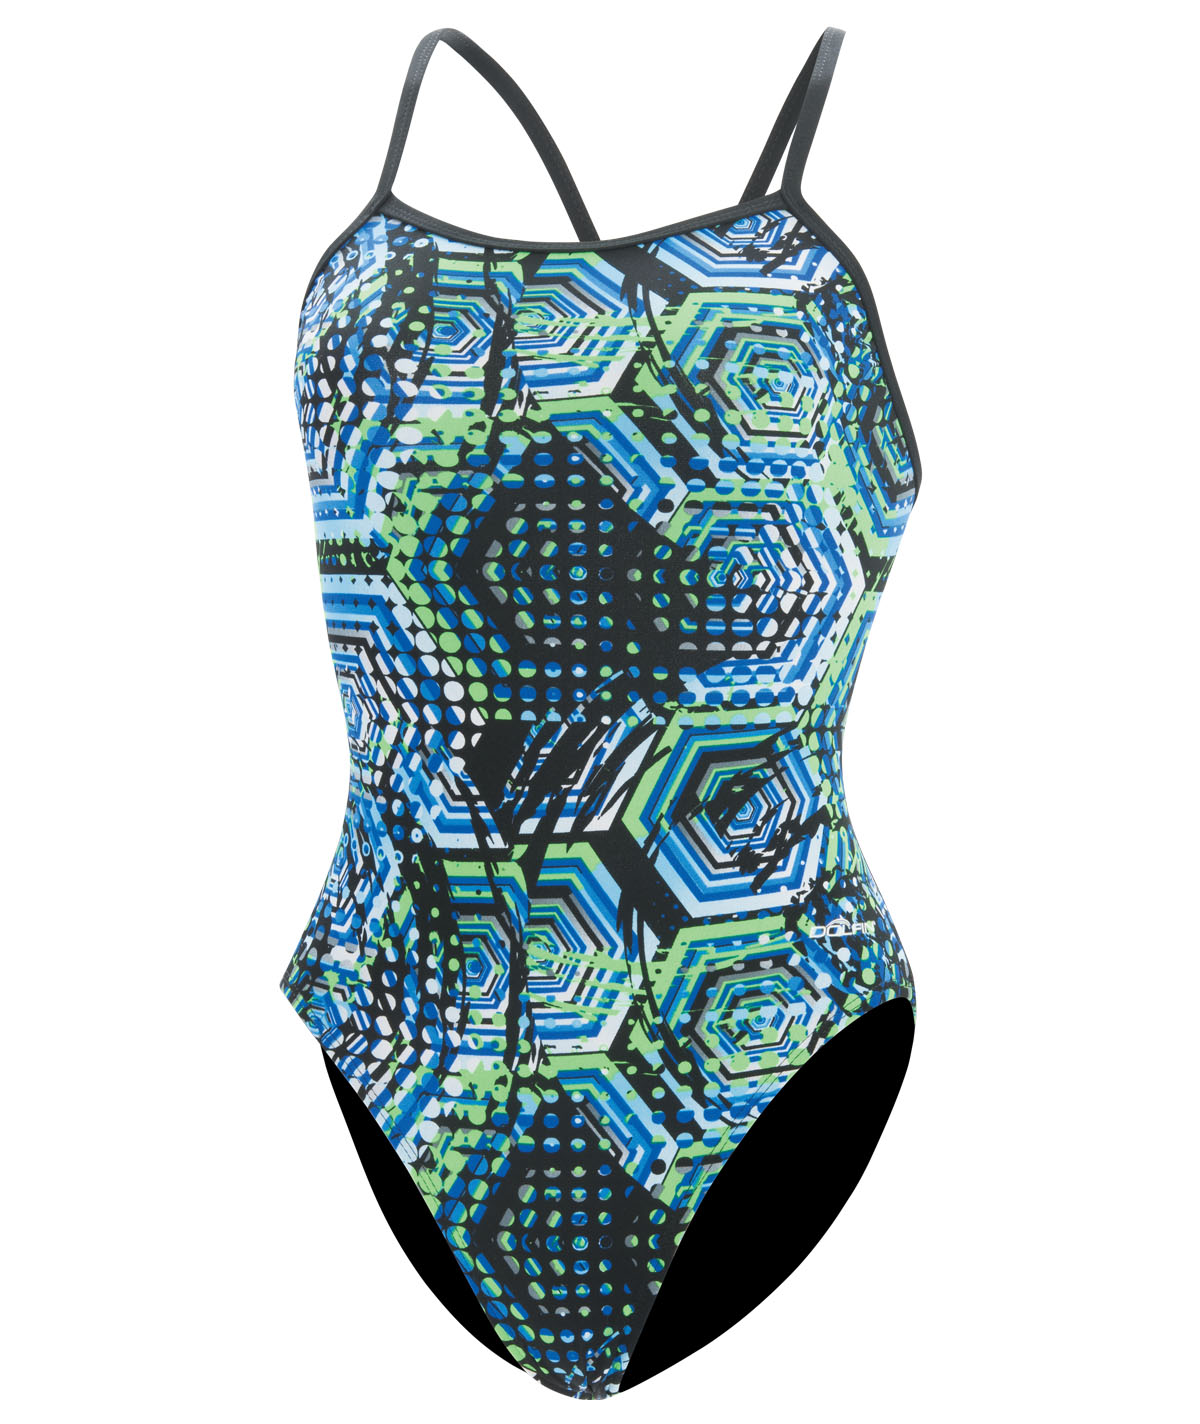 Women's Reliance Hive V-Back One Piece Swimsuit